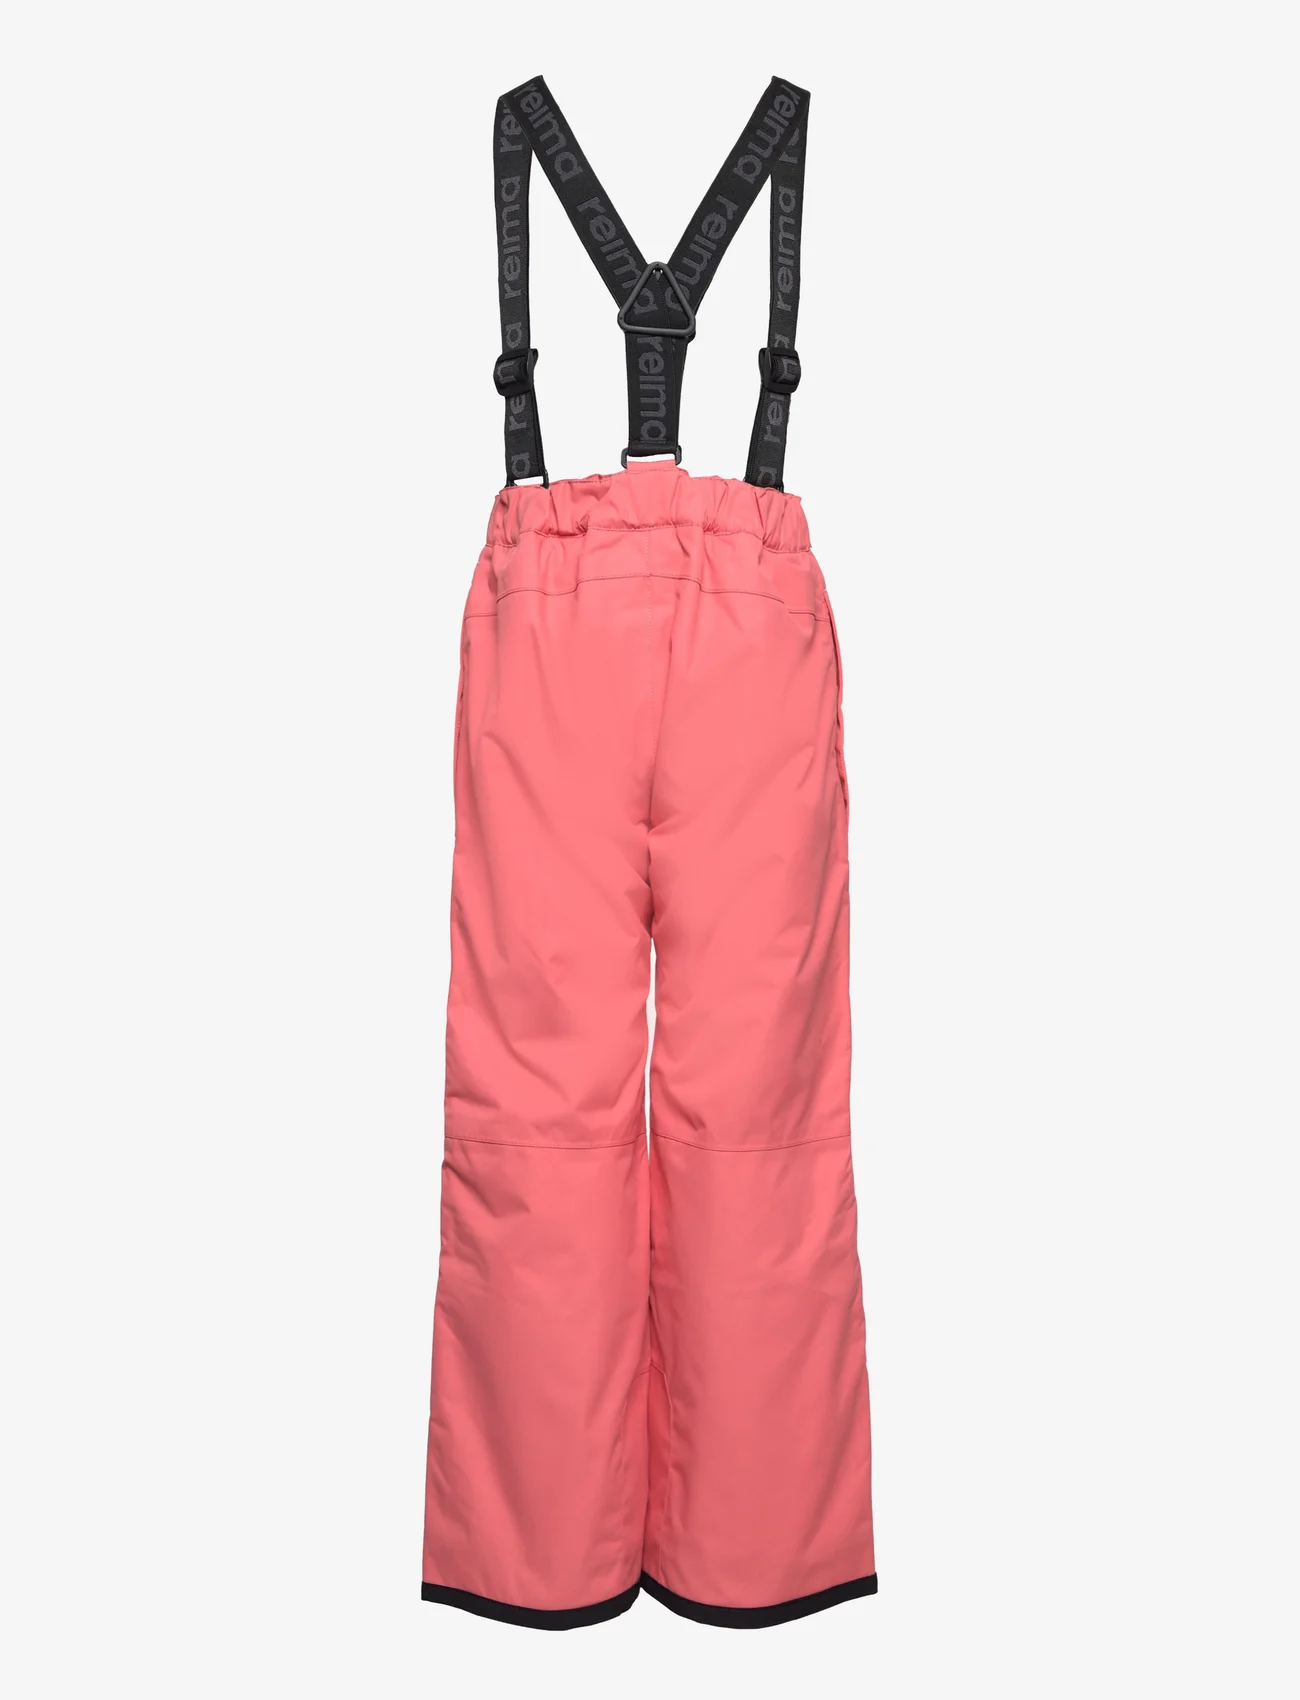 Reima - Kids' winter trousers Proxima - nederdelar - pink coral - 1